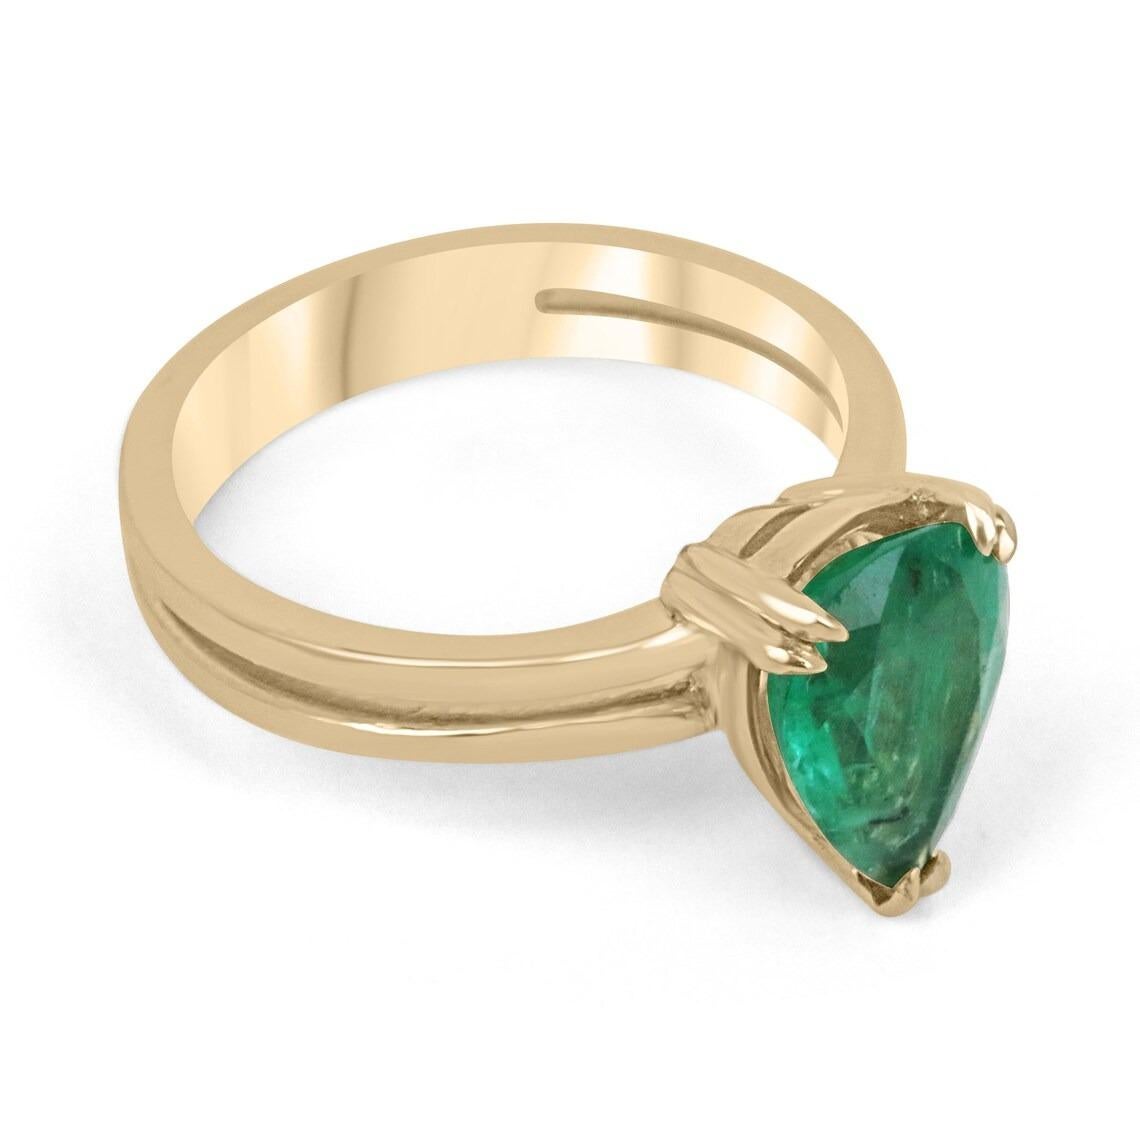 A stunning solitaire emerald right-hand/engagement ring. This edgy piece showcases a distinctive pear-cut emerald from the origin of Zambia. The gemstone showcases a remarkable medium-dark green color, with a subtle yellowish-green hue. Very good